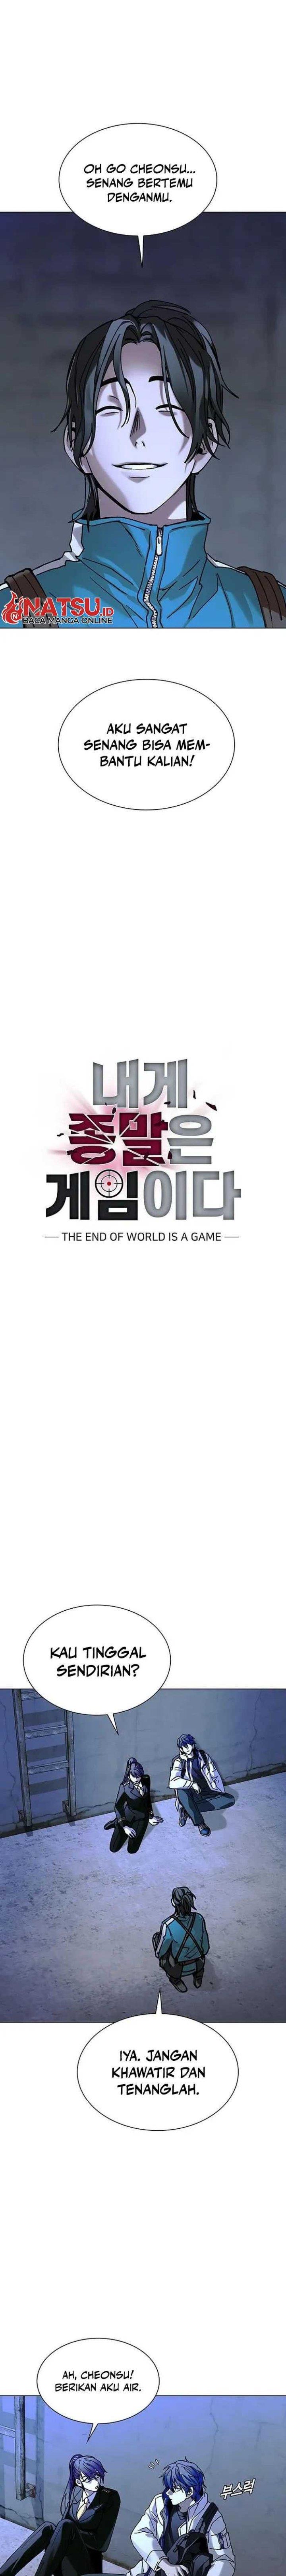 The End of the World is Just a Game to Me Chapter 19